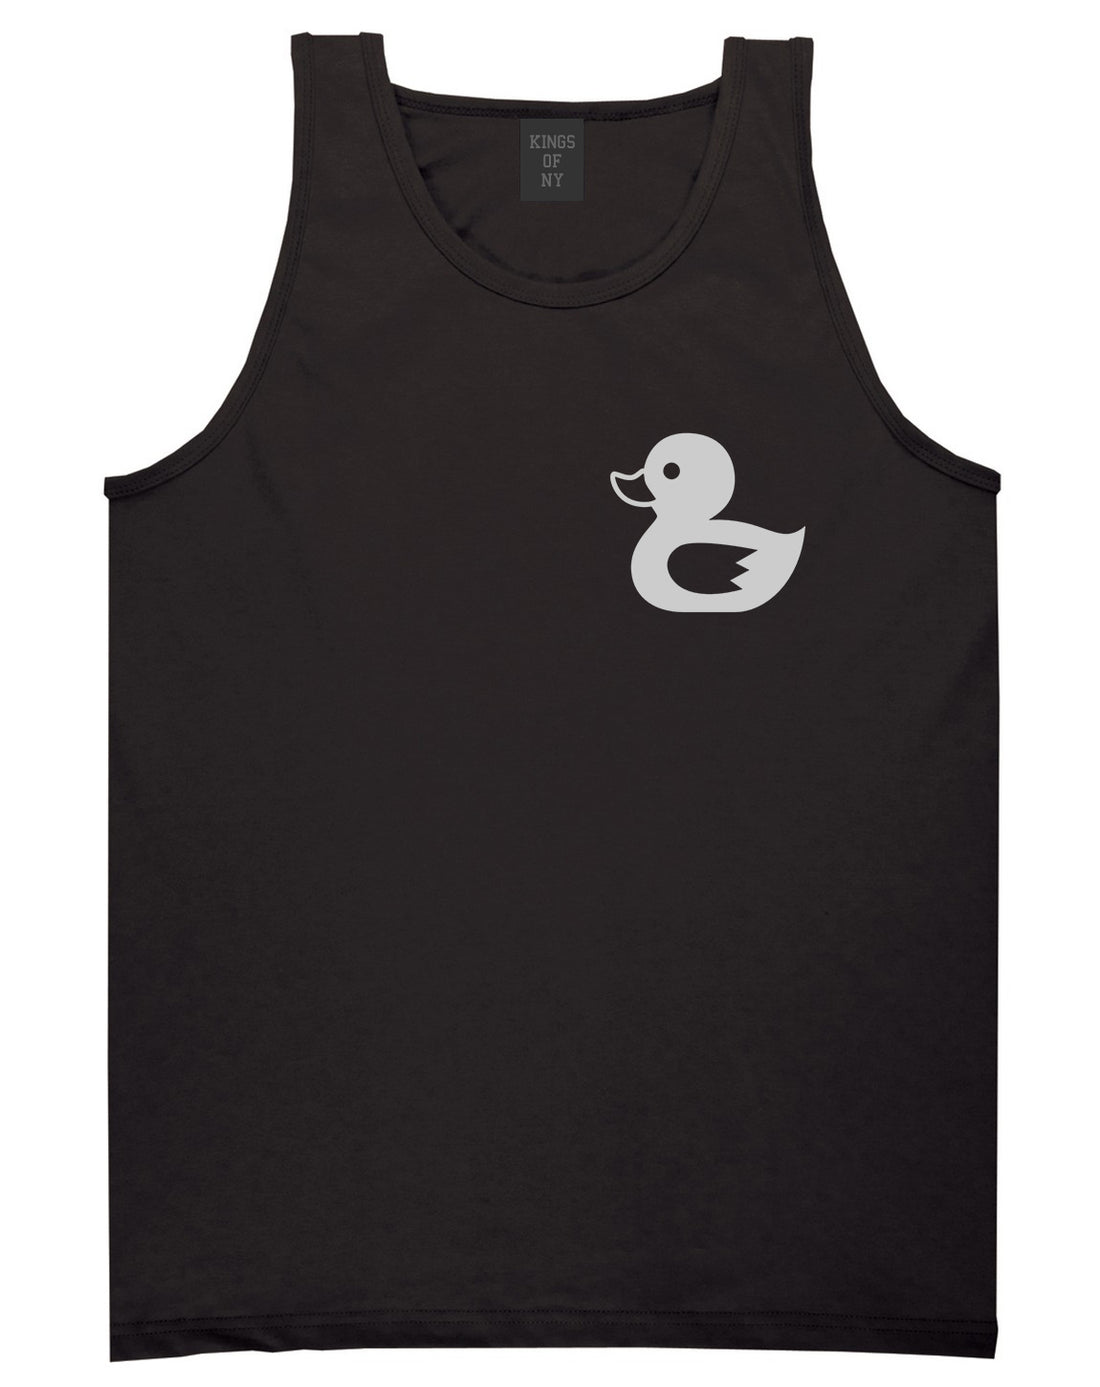 Rubber_Duck_Chest Mens Black Tank Top Shirt by Kings Of NY